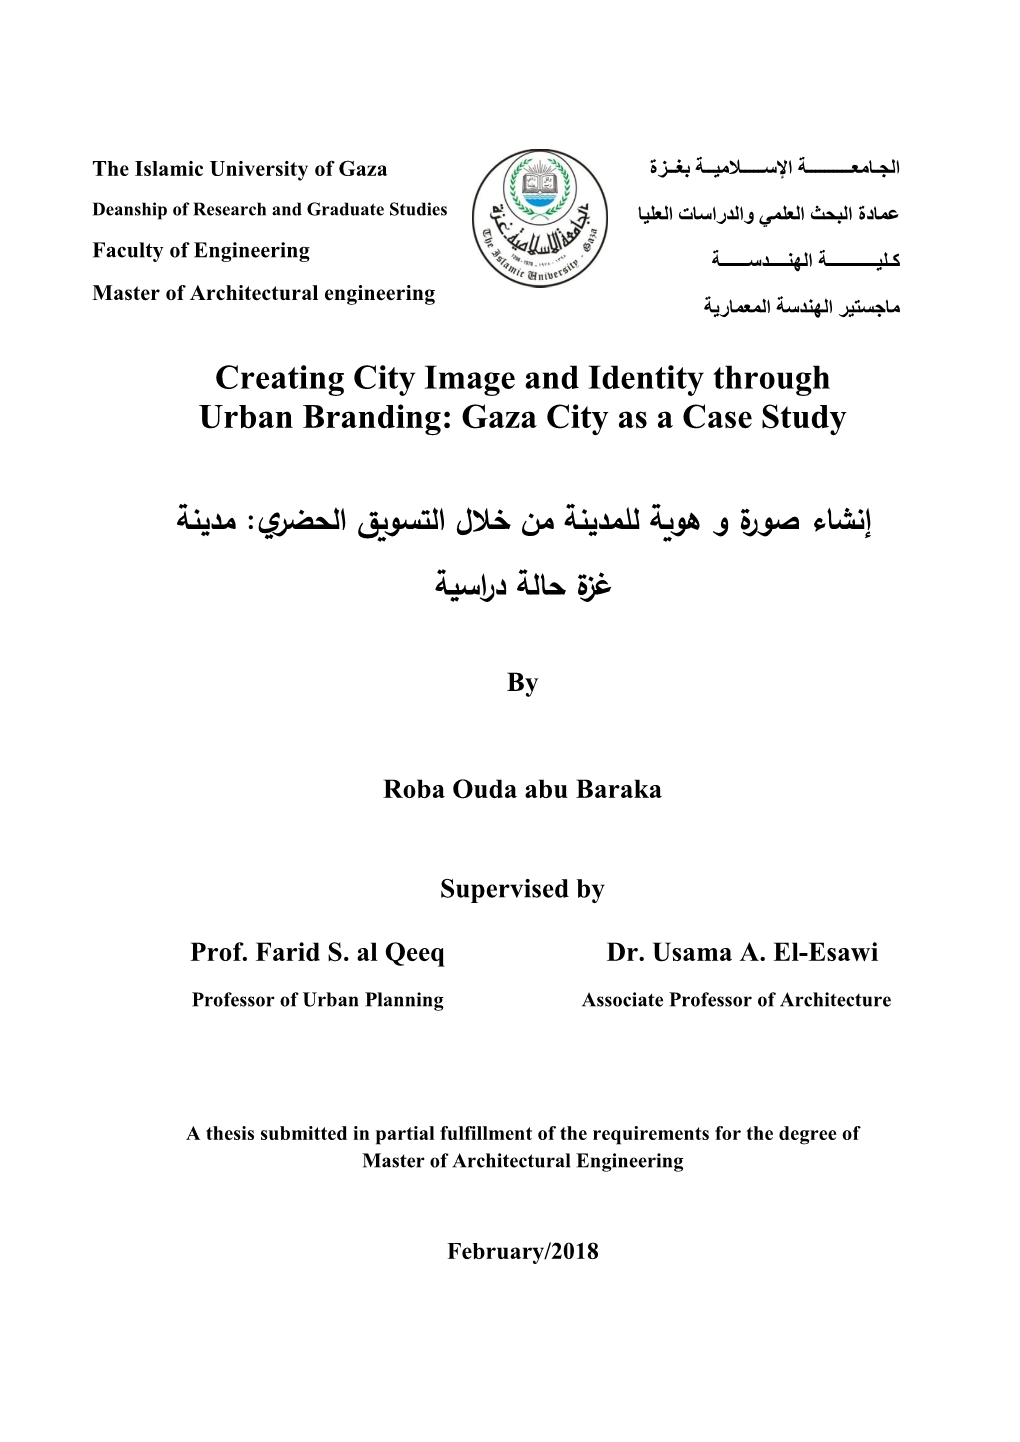 Creating City Image and Identity Through Urban Branding: Gaza City As a Case Study